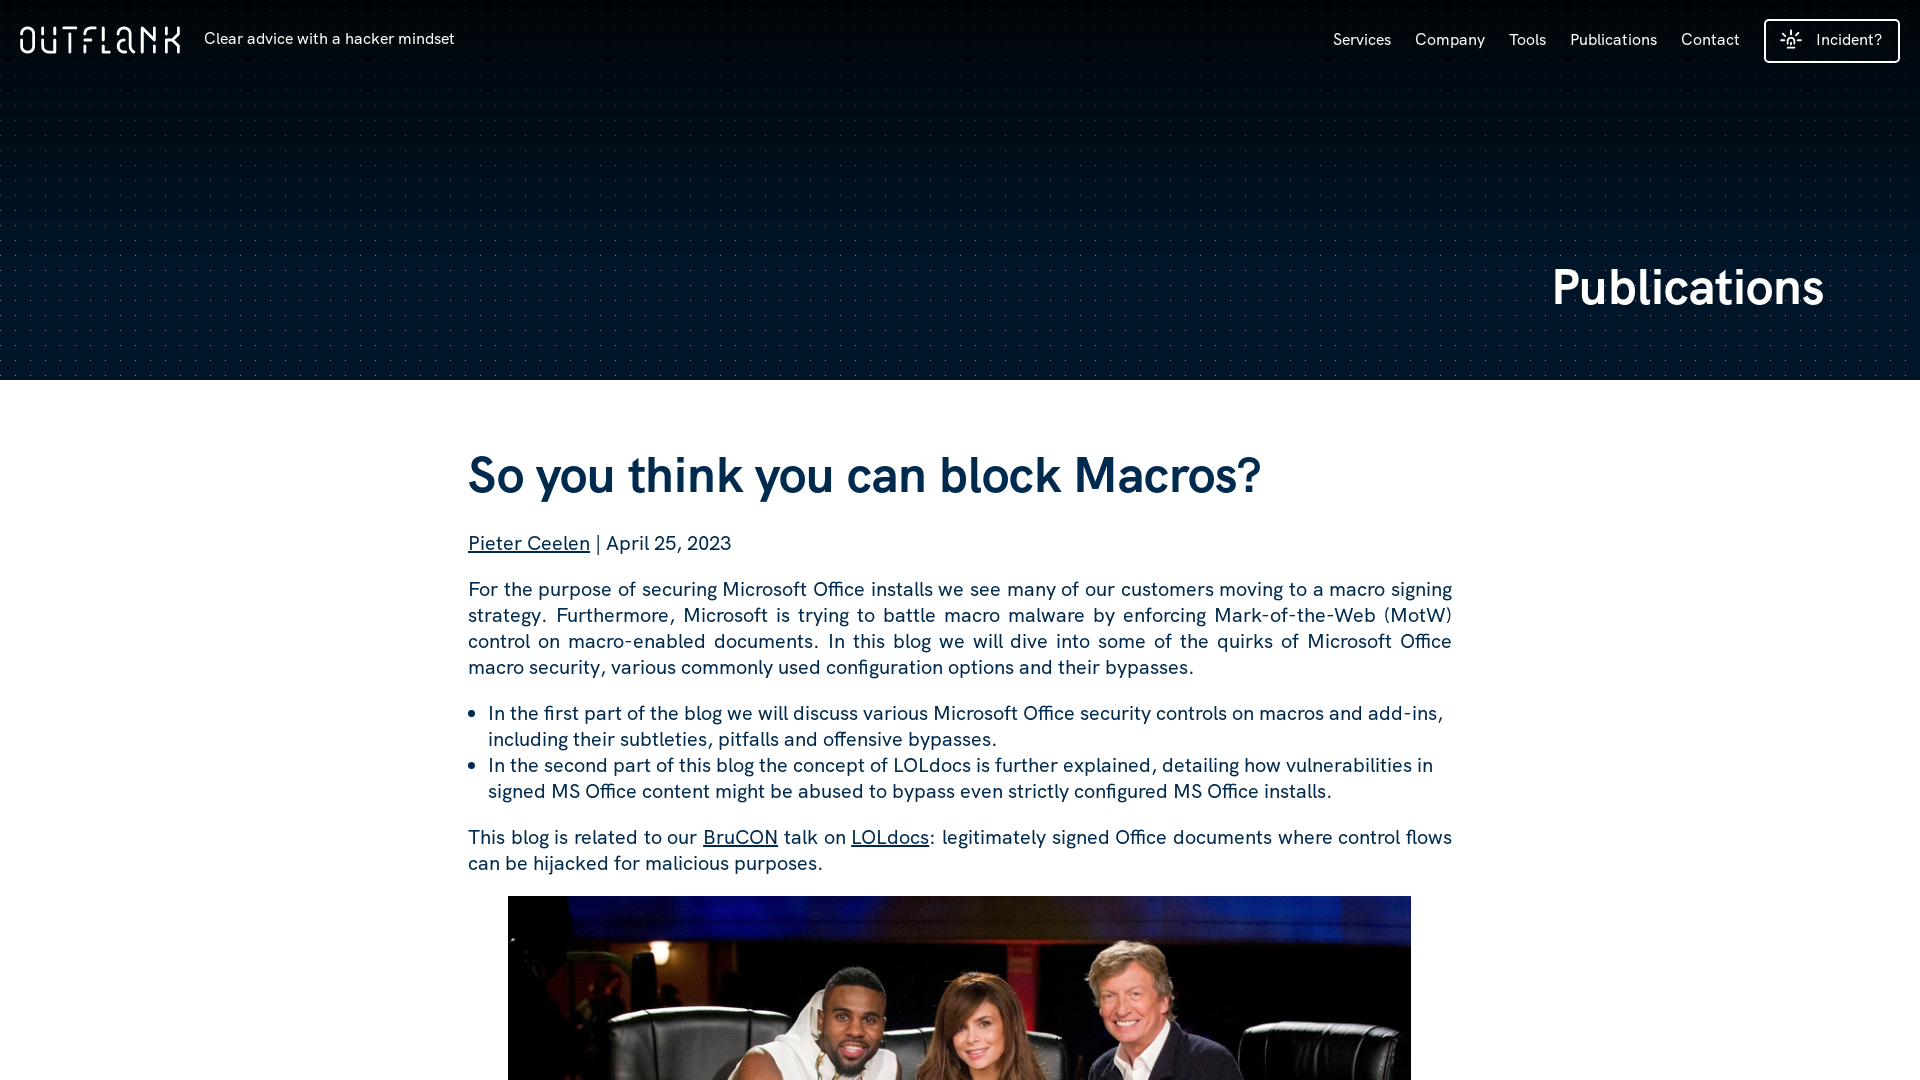 So you think you can block Macros? | Outflank